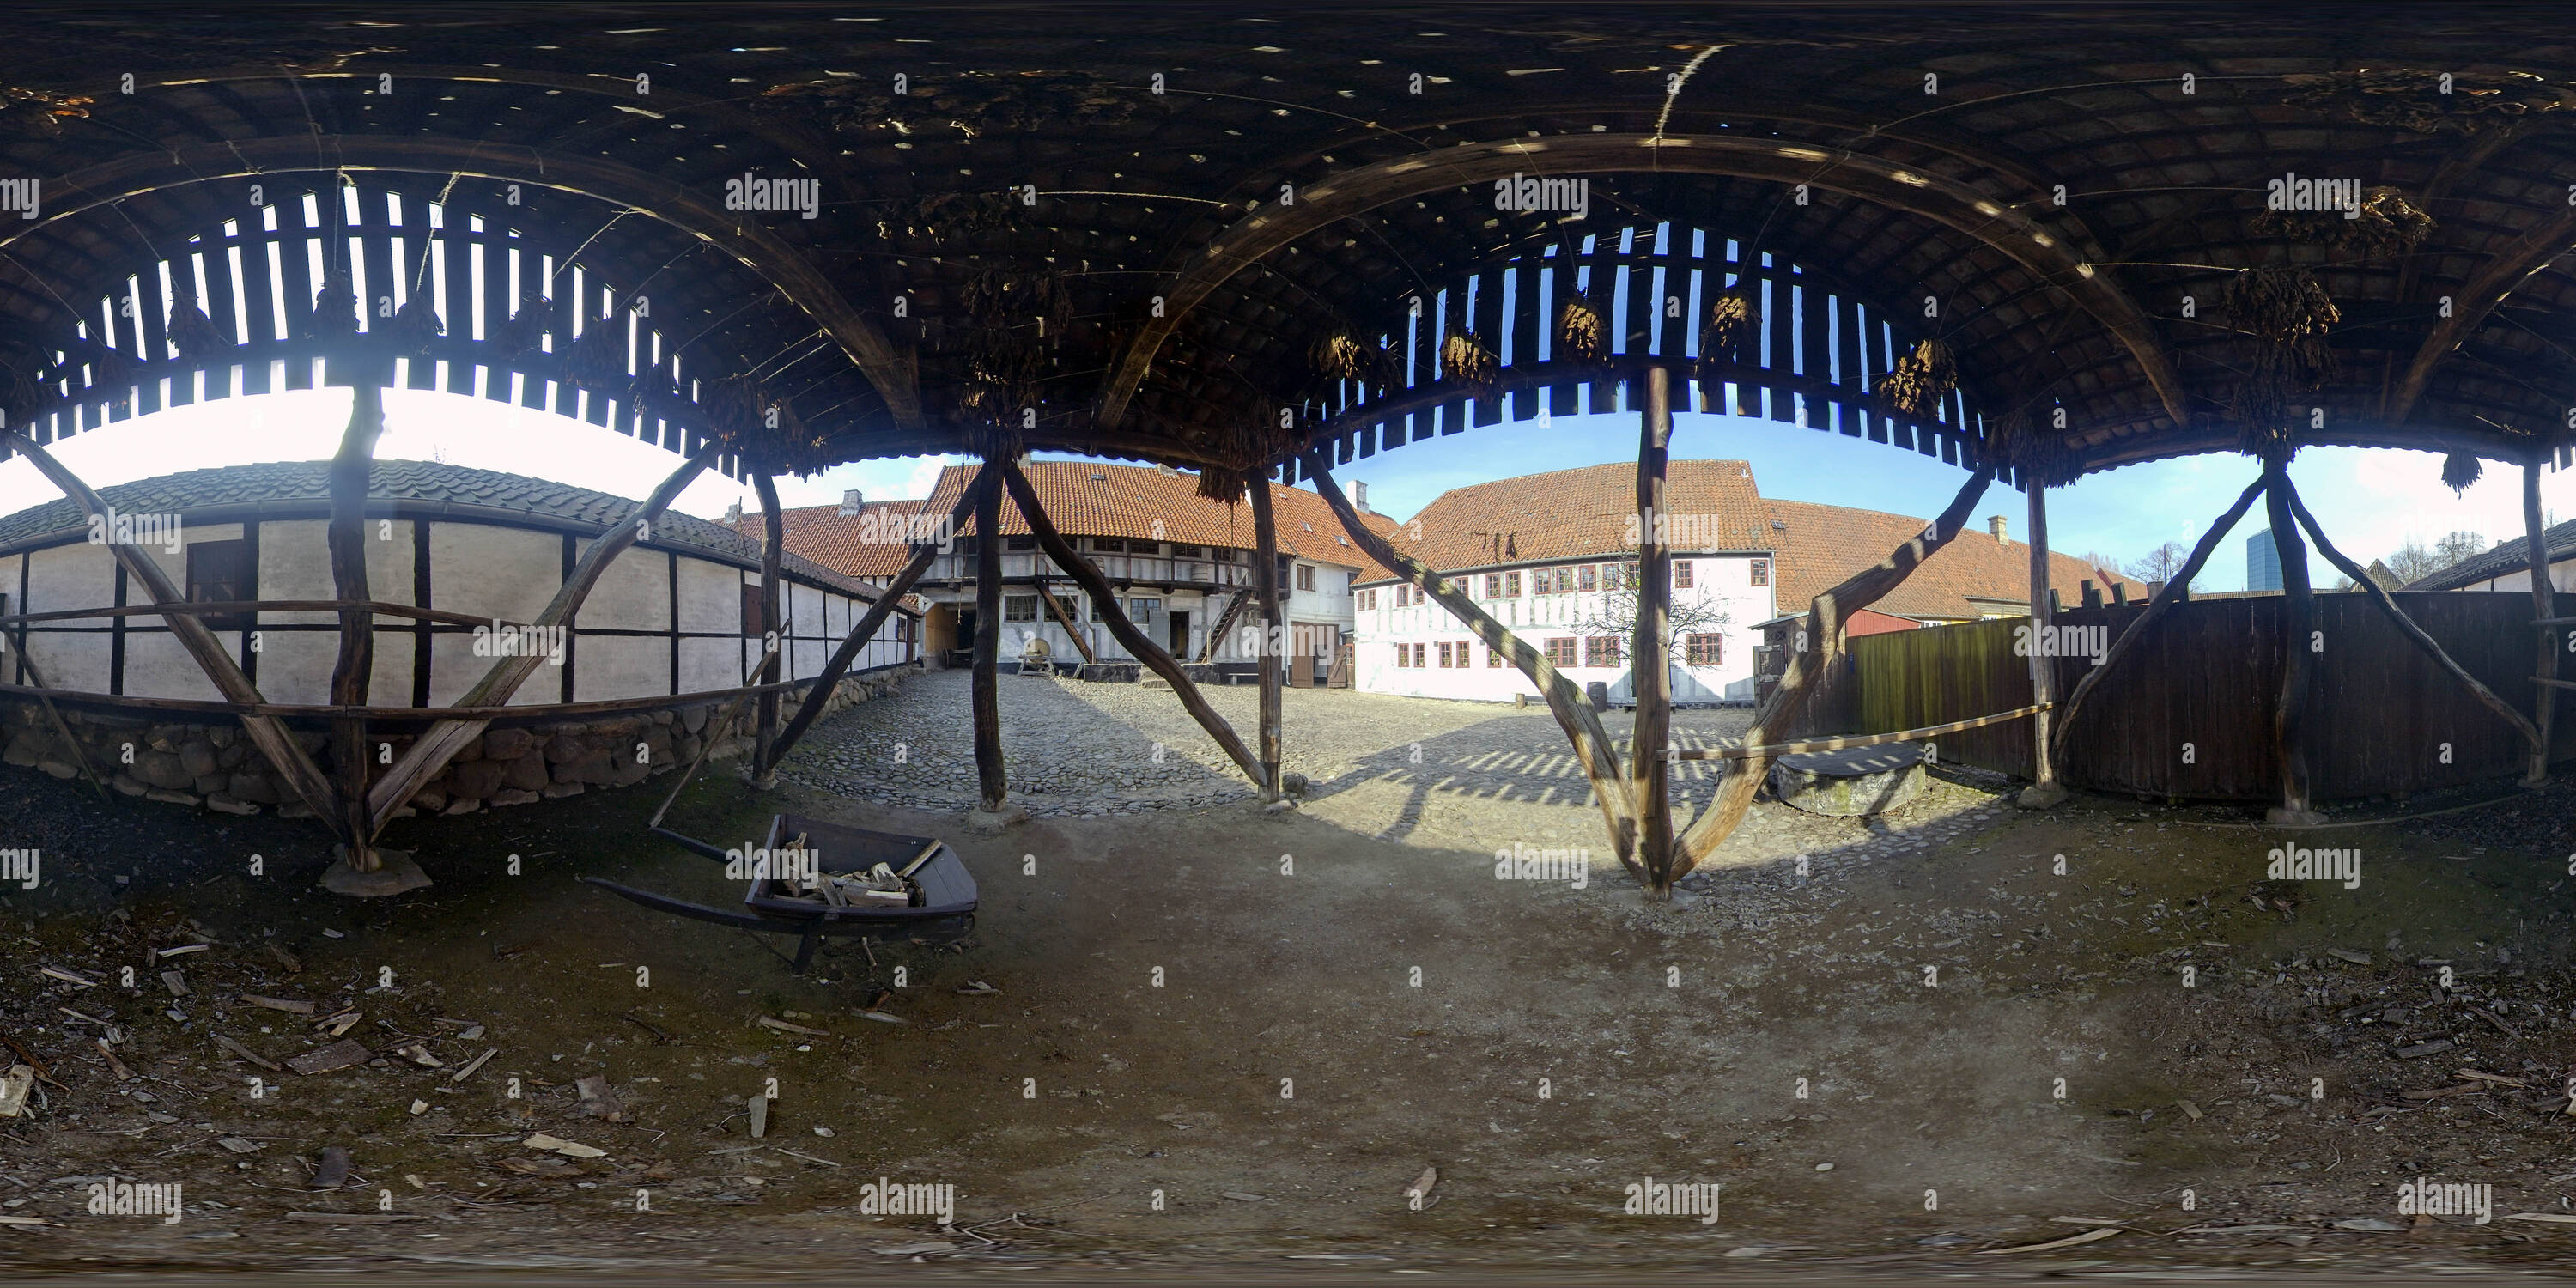 360 degree panoramic view of Tobacco drying-shed, The Old Town